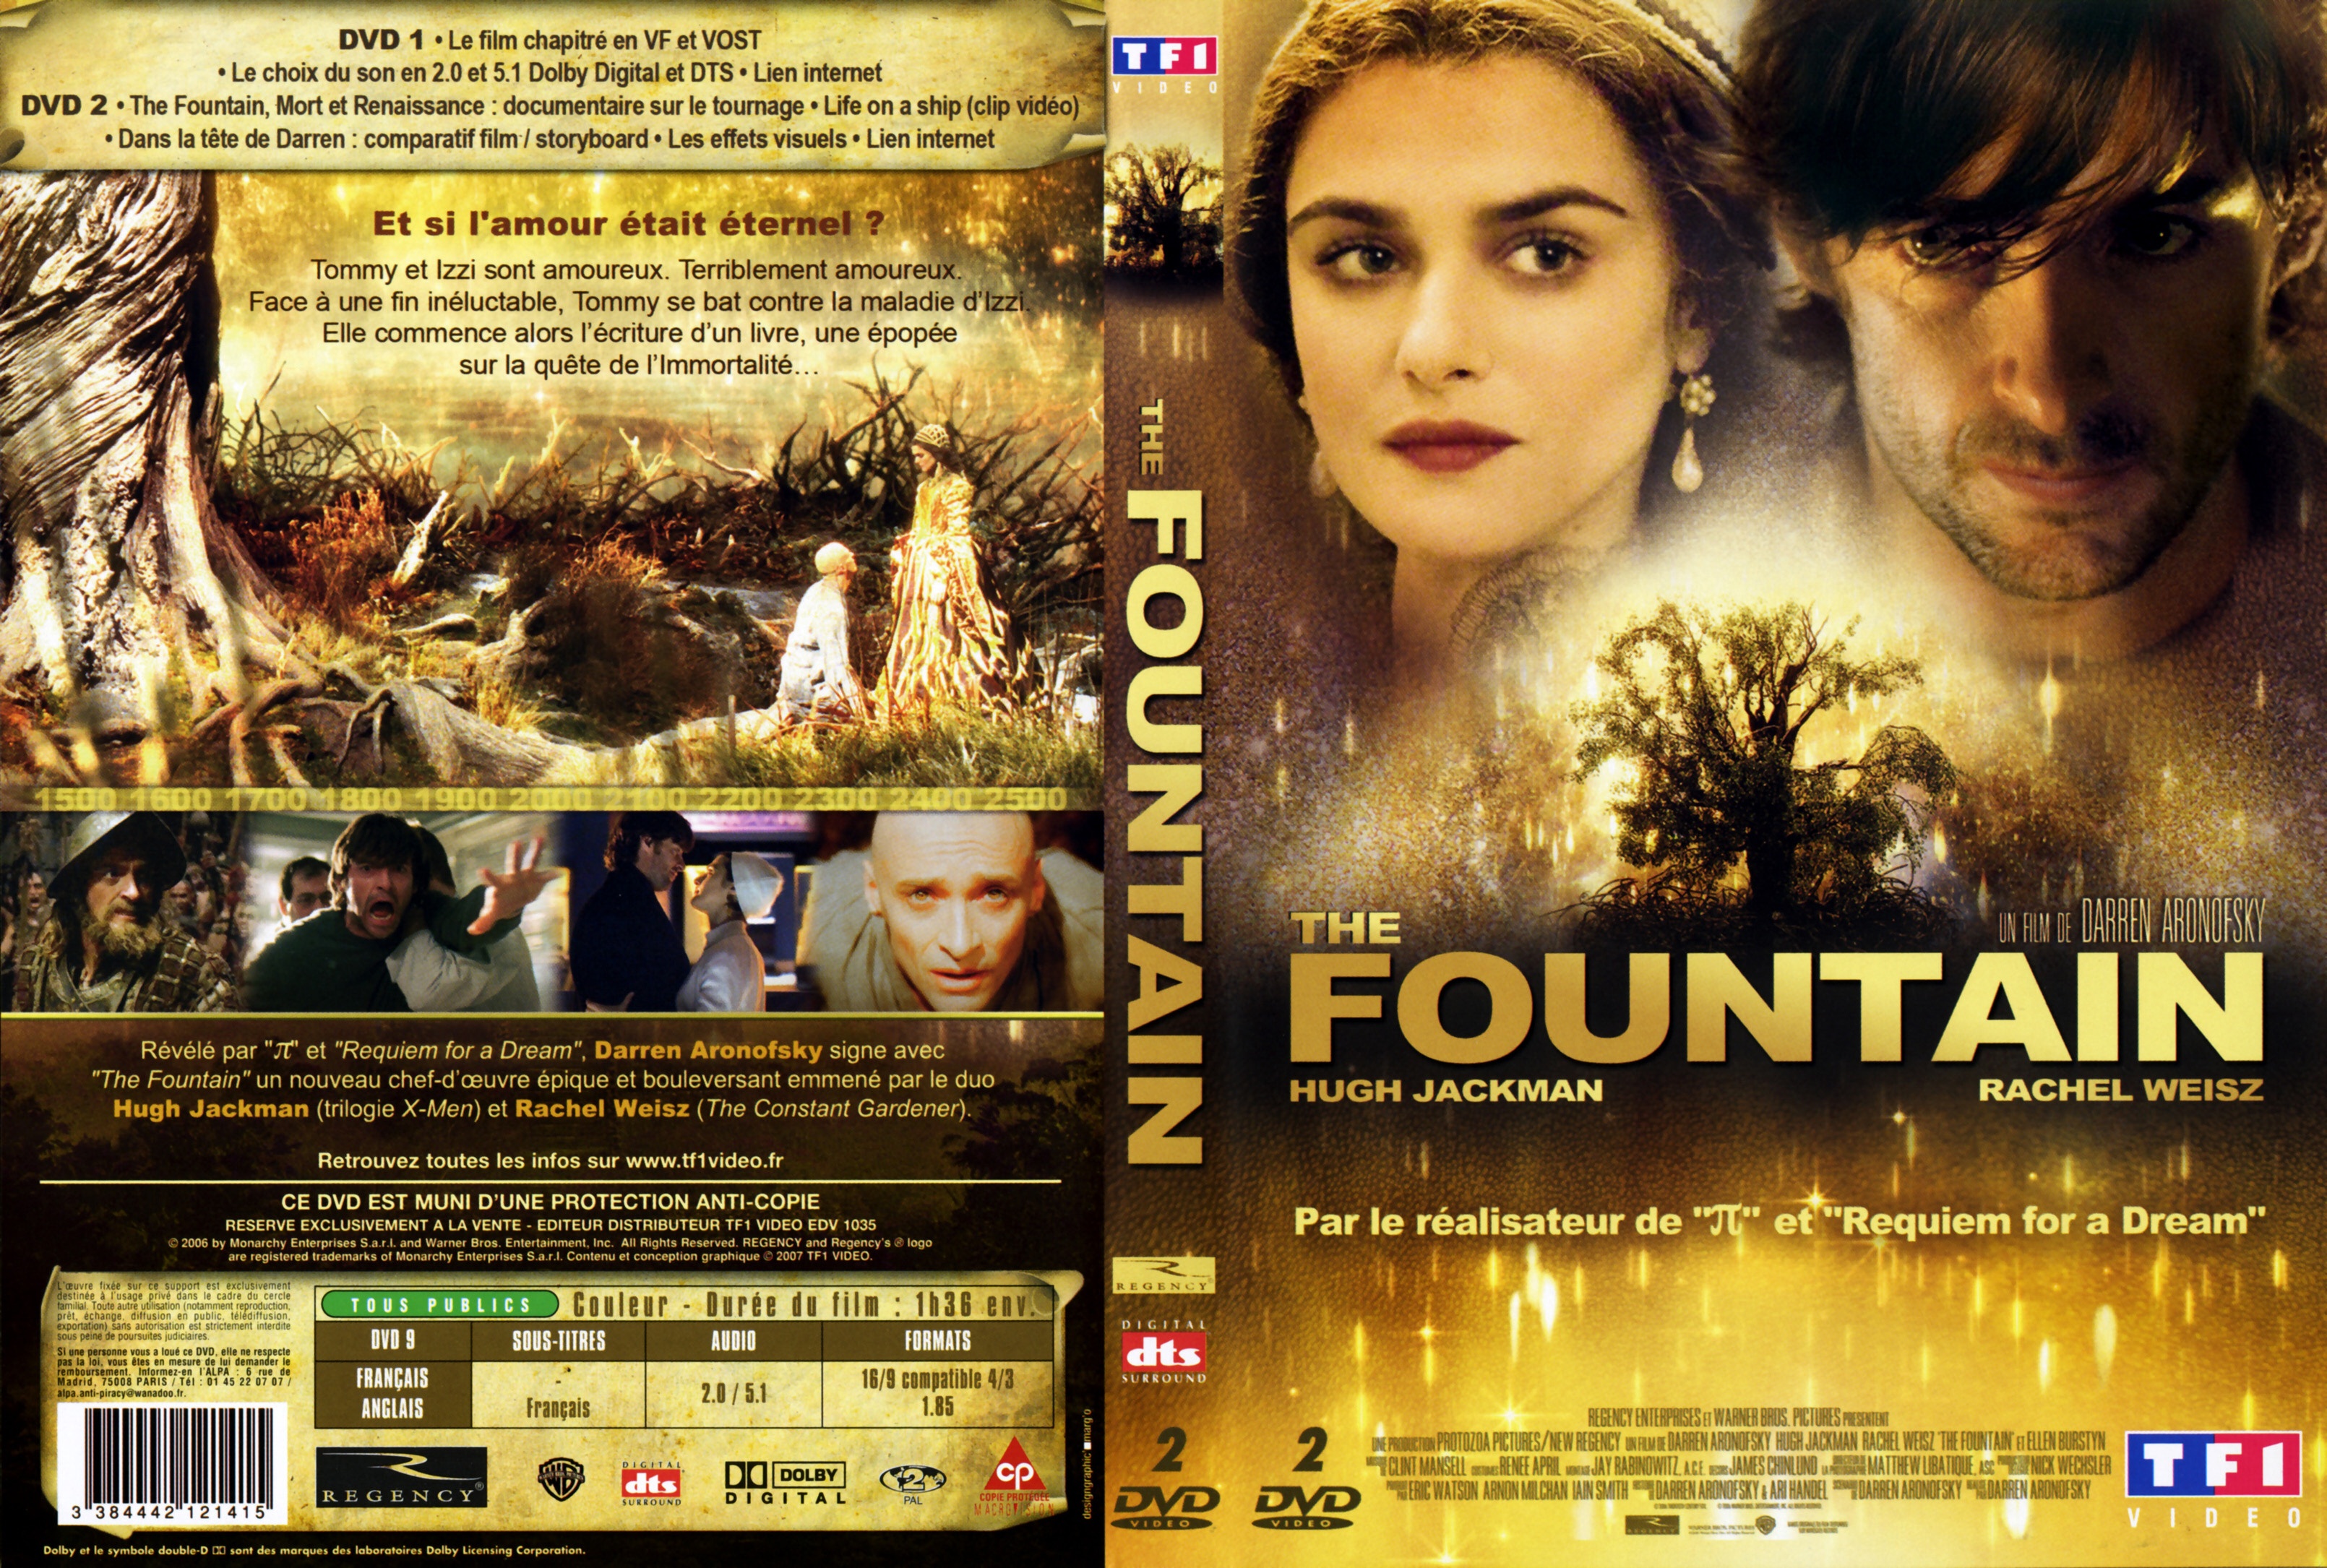 Jaquette DVD The fountain v2